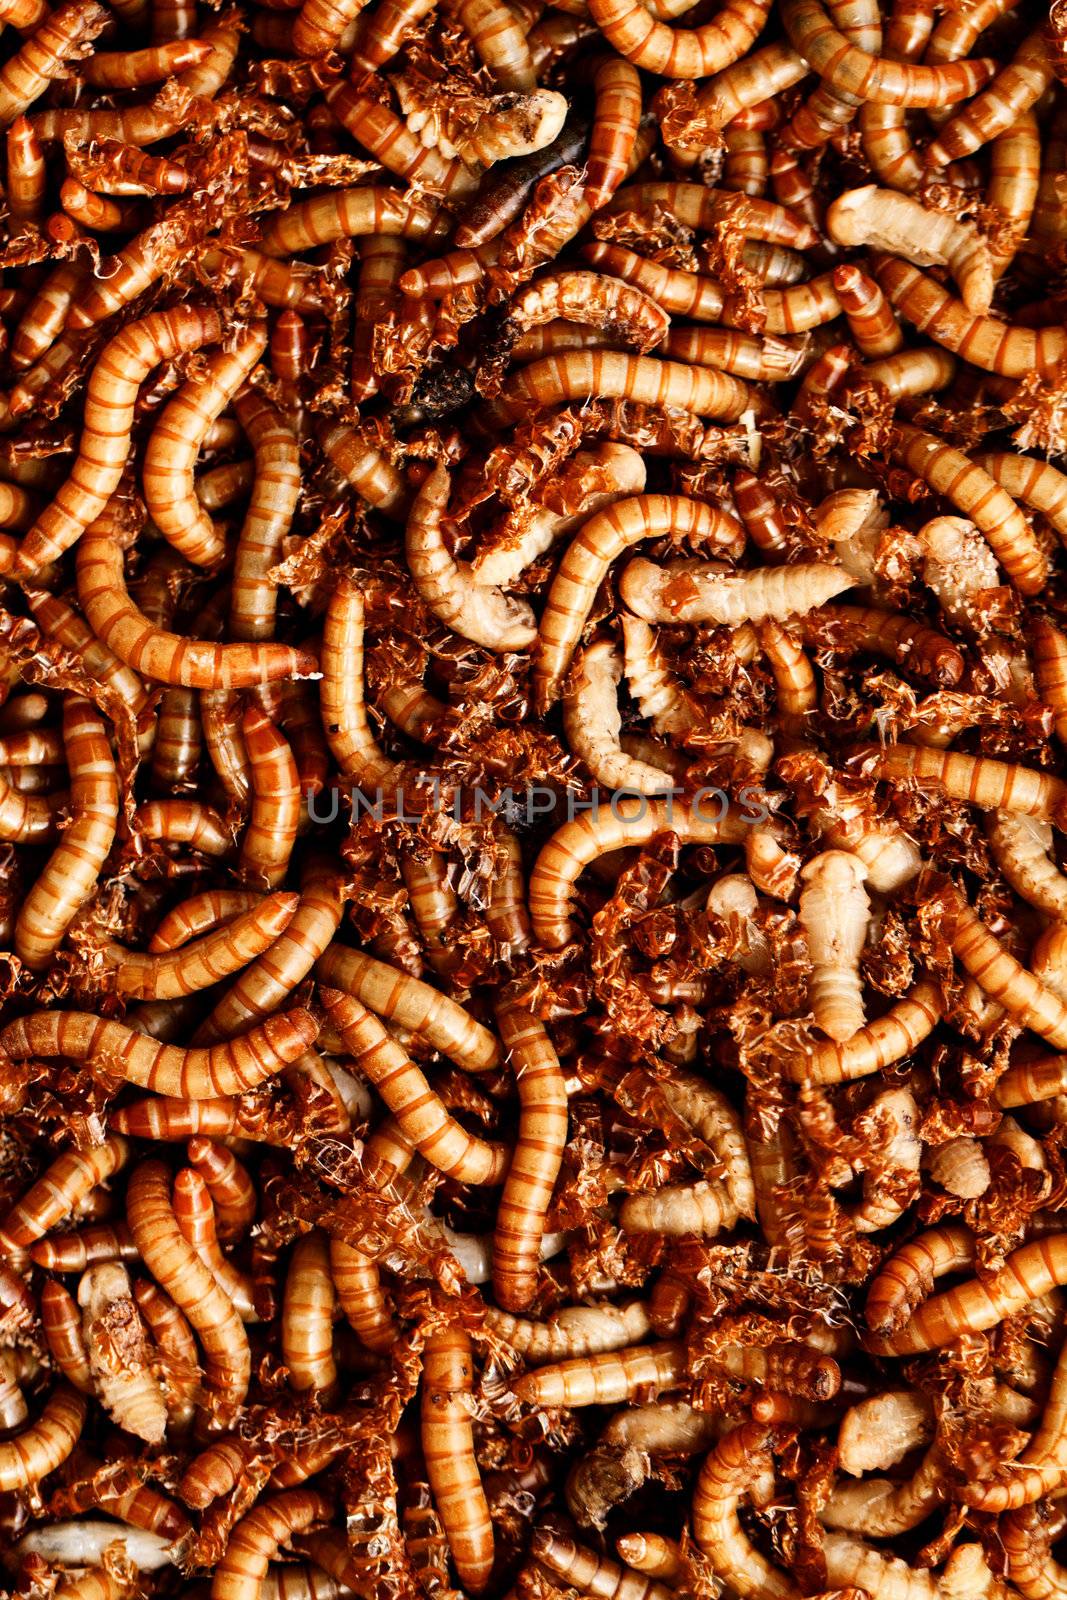 mealworms by Nneirda